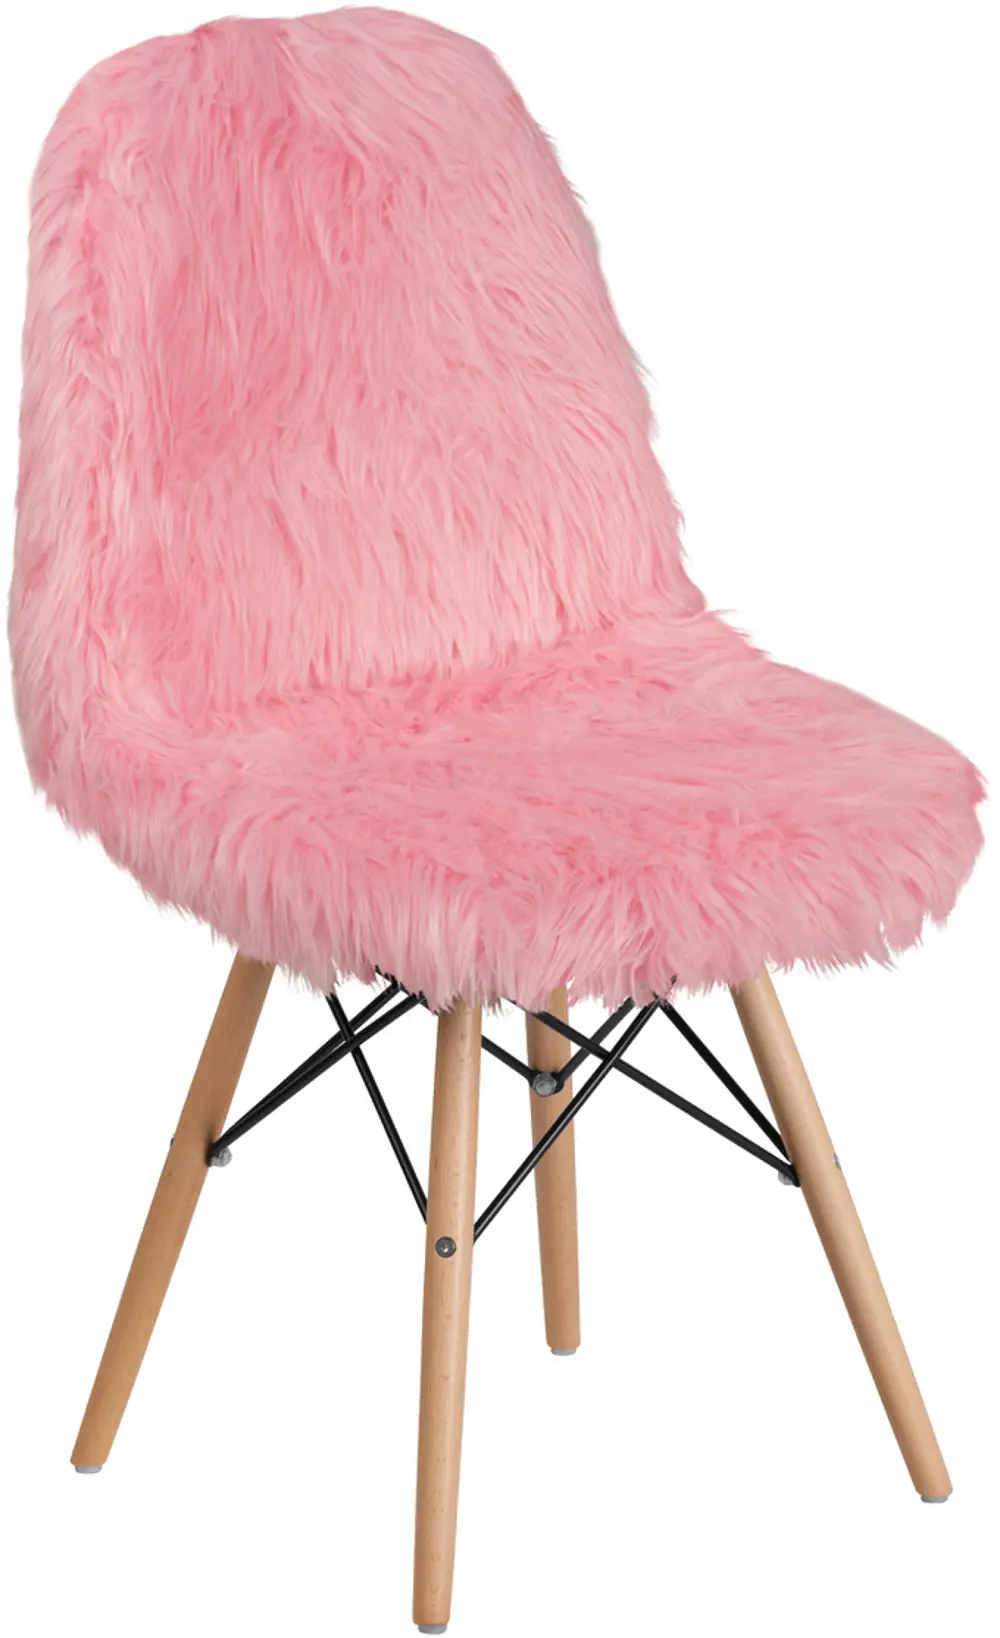 Contemporary Shaggy Pink Accent Chair - Shaggy Dog-1